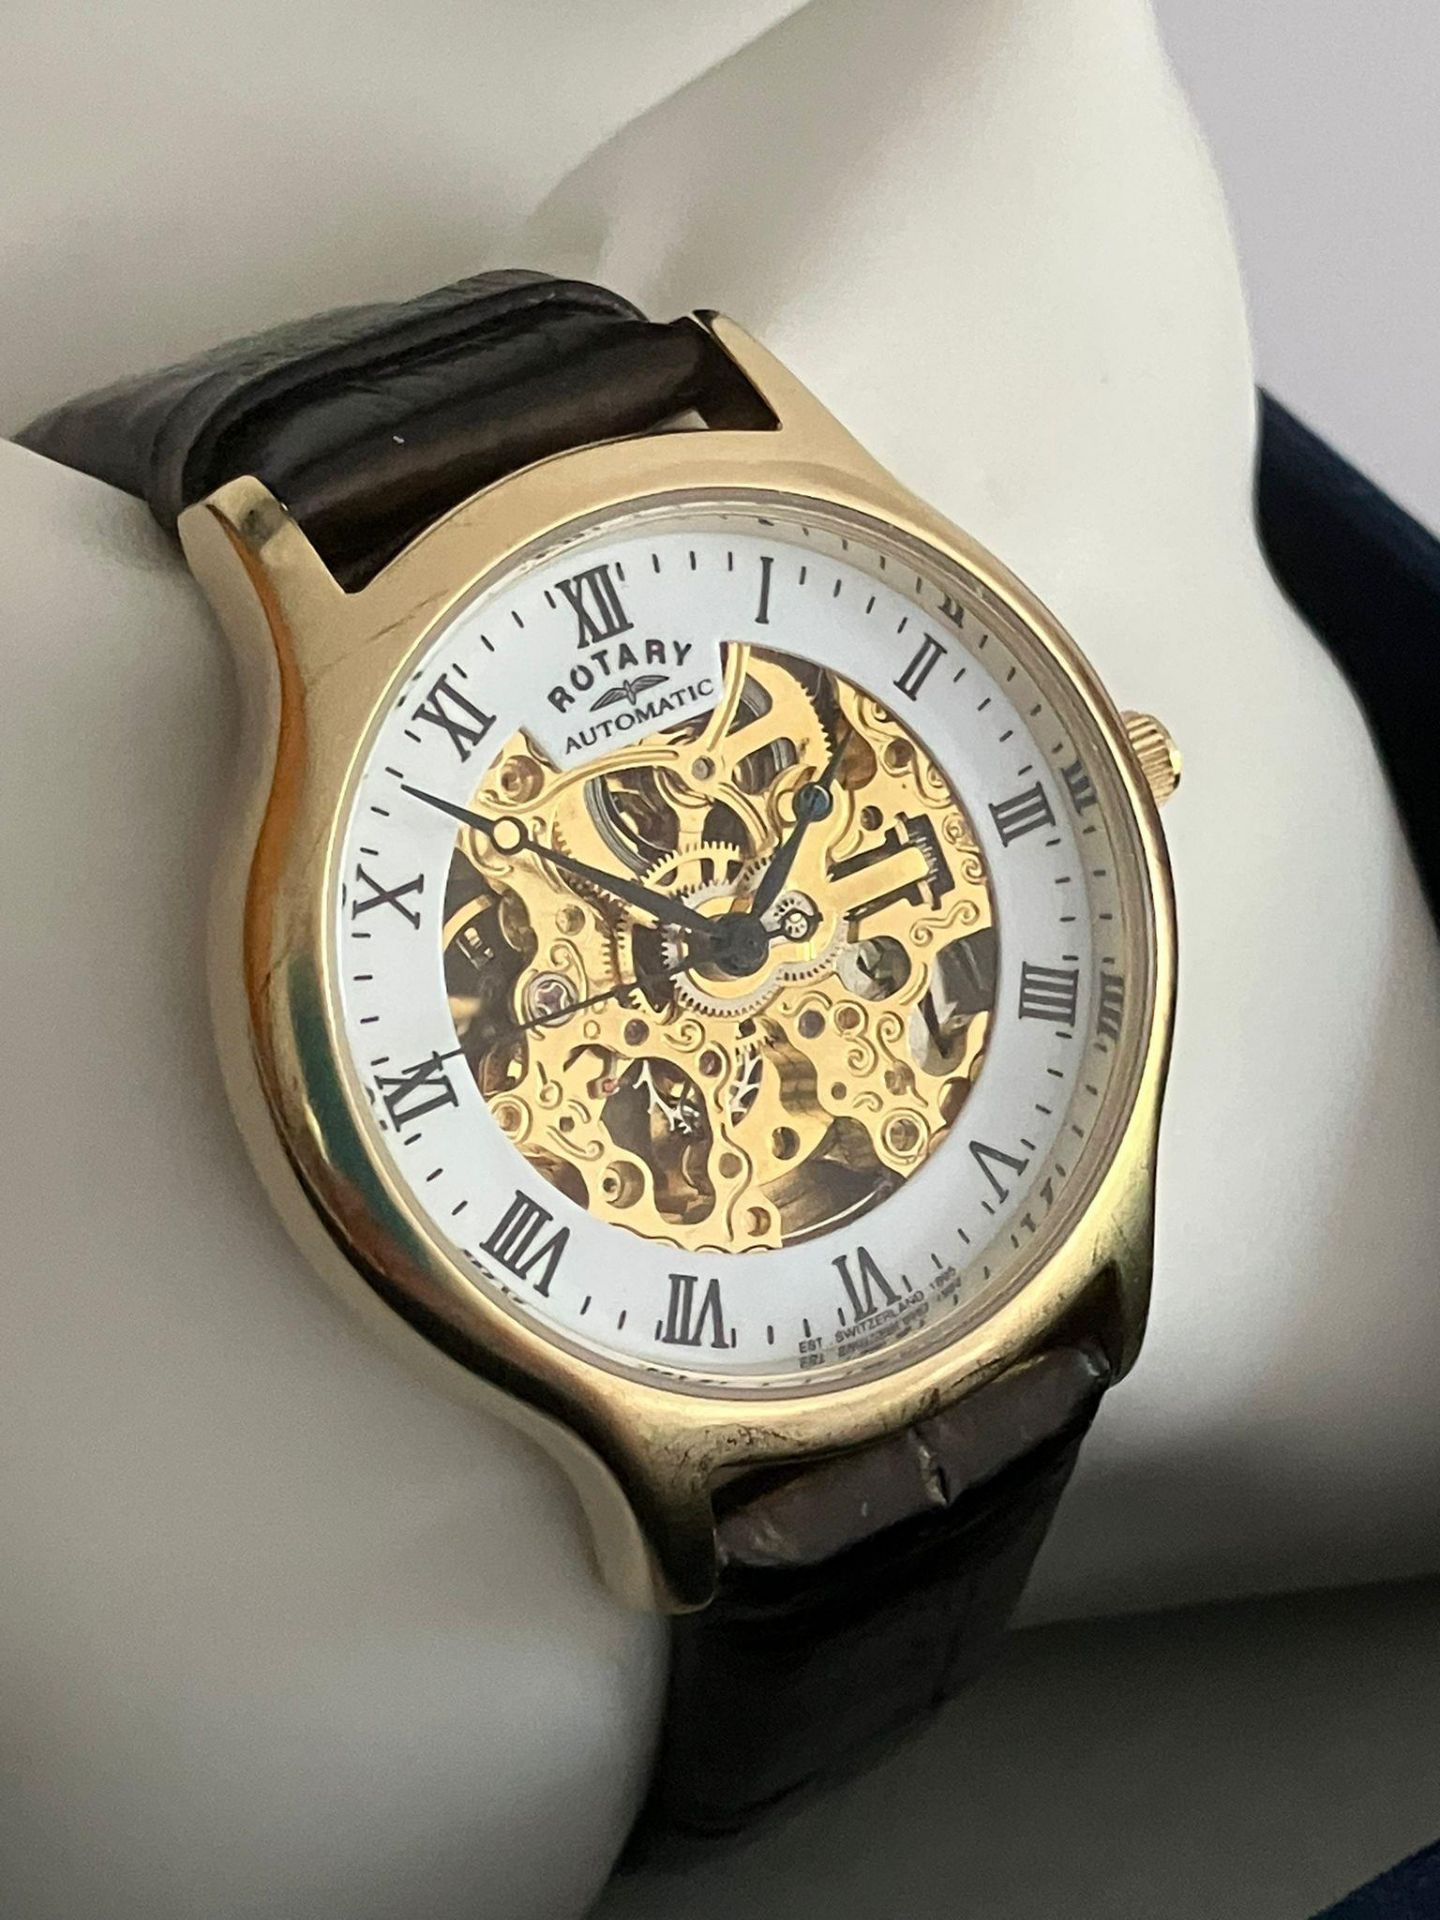 Gentlemans ROTARY AUTOMATIC SKELETON WRISTWATCH. Finished in gold tone with leather strap. - Image 9 of 9